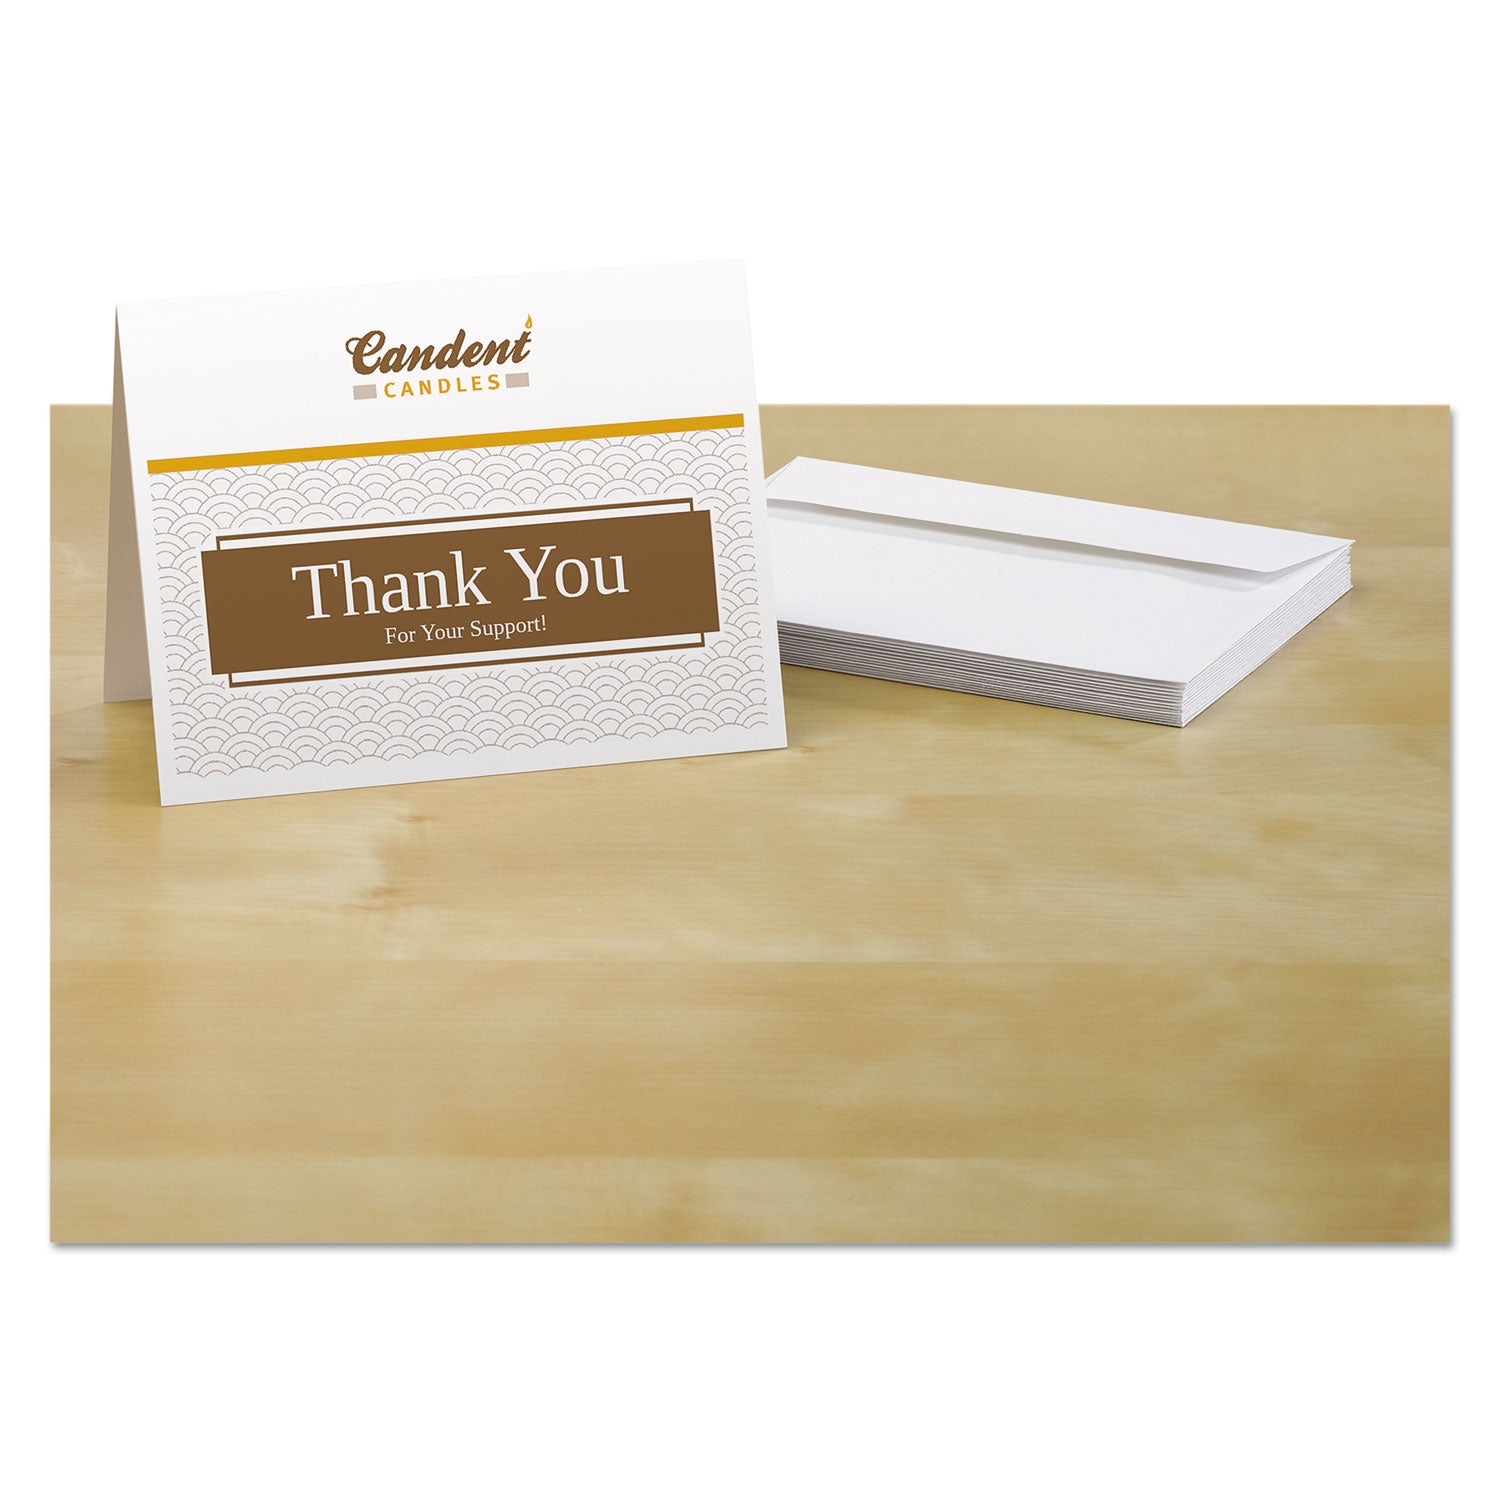 Note Cards with Matching Envelopes, Inkjet, 85 lb, 4.25 x 5.5, Matte White, 60 Cards, 2 Cards/Sheet, 30 Sheets/Pack - 